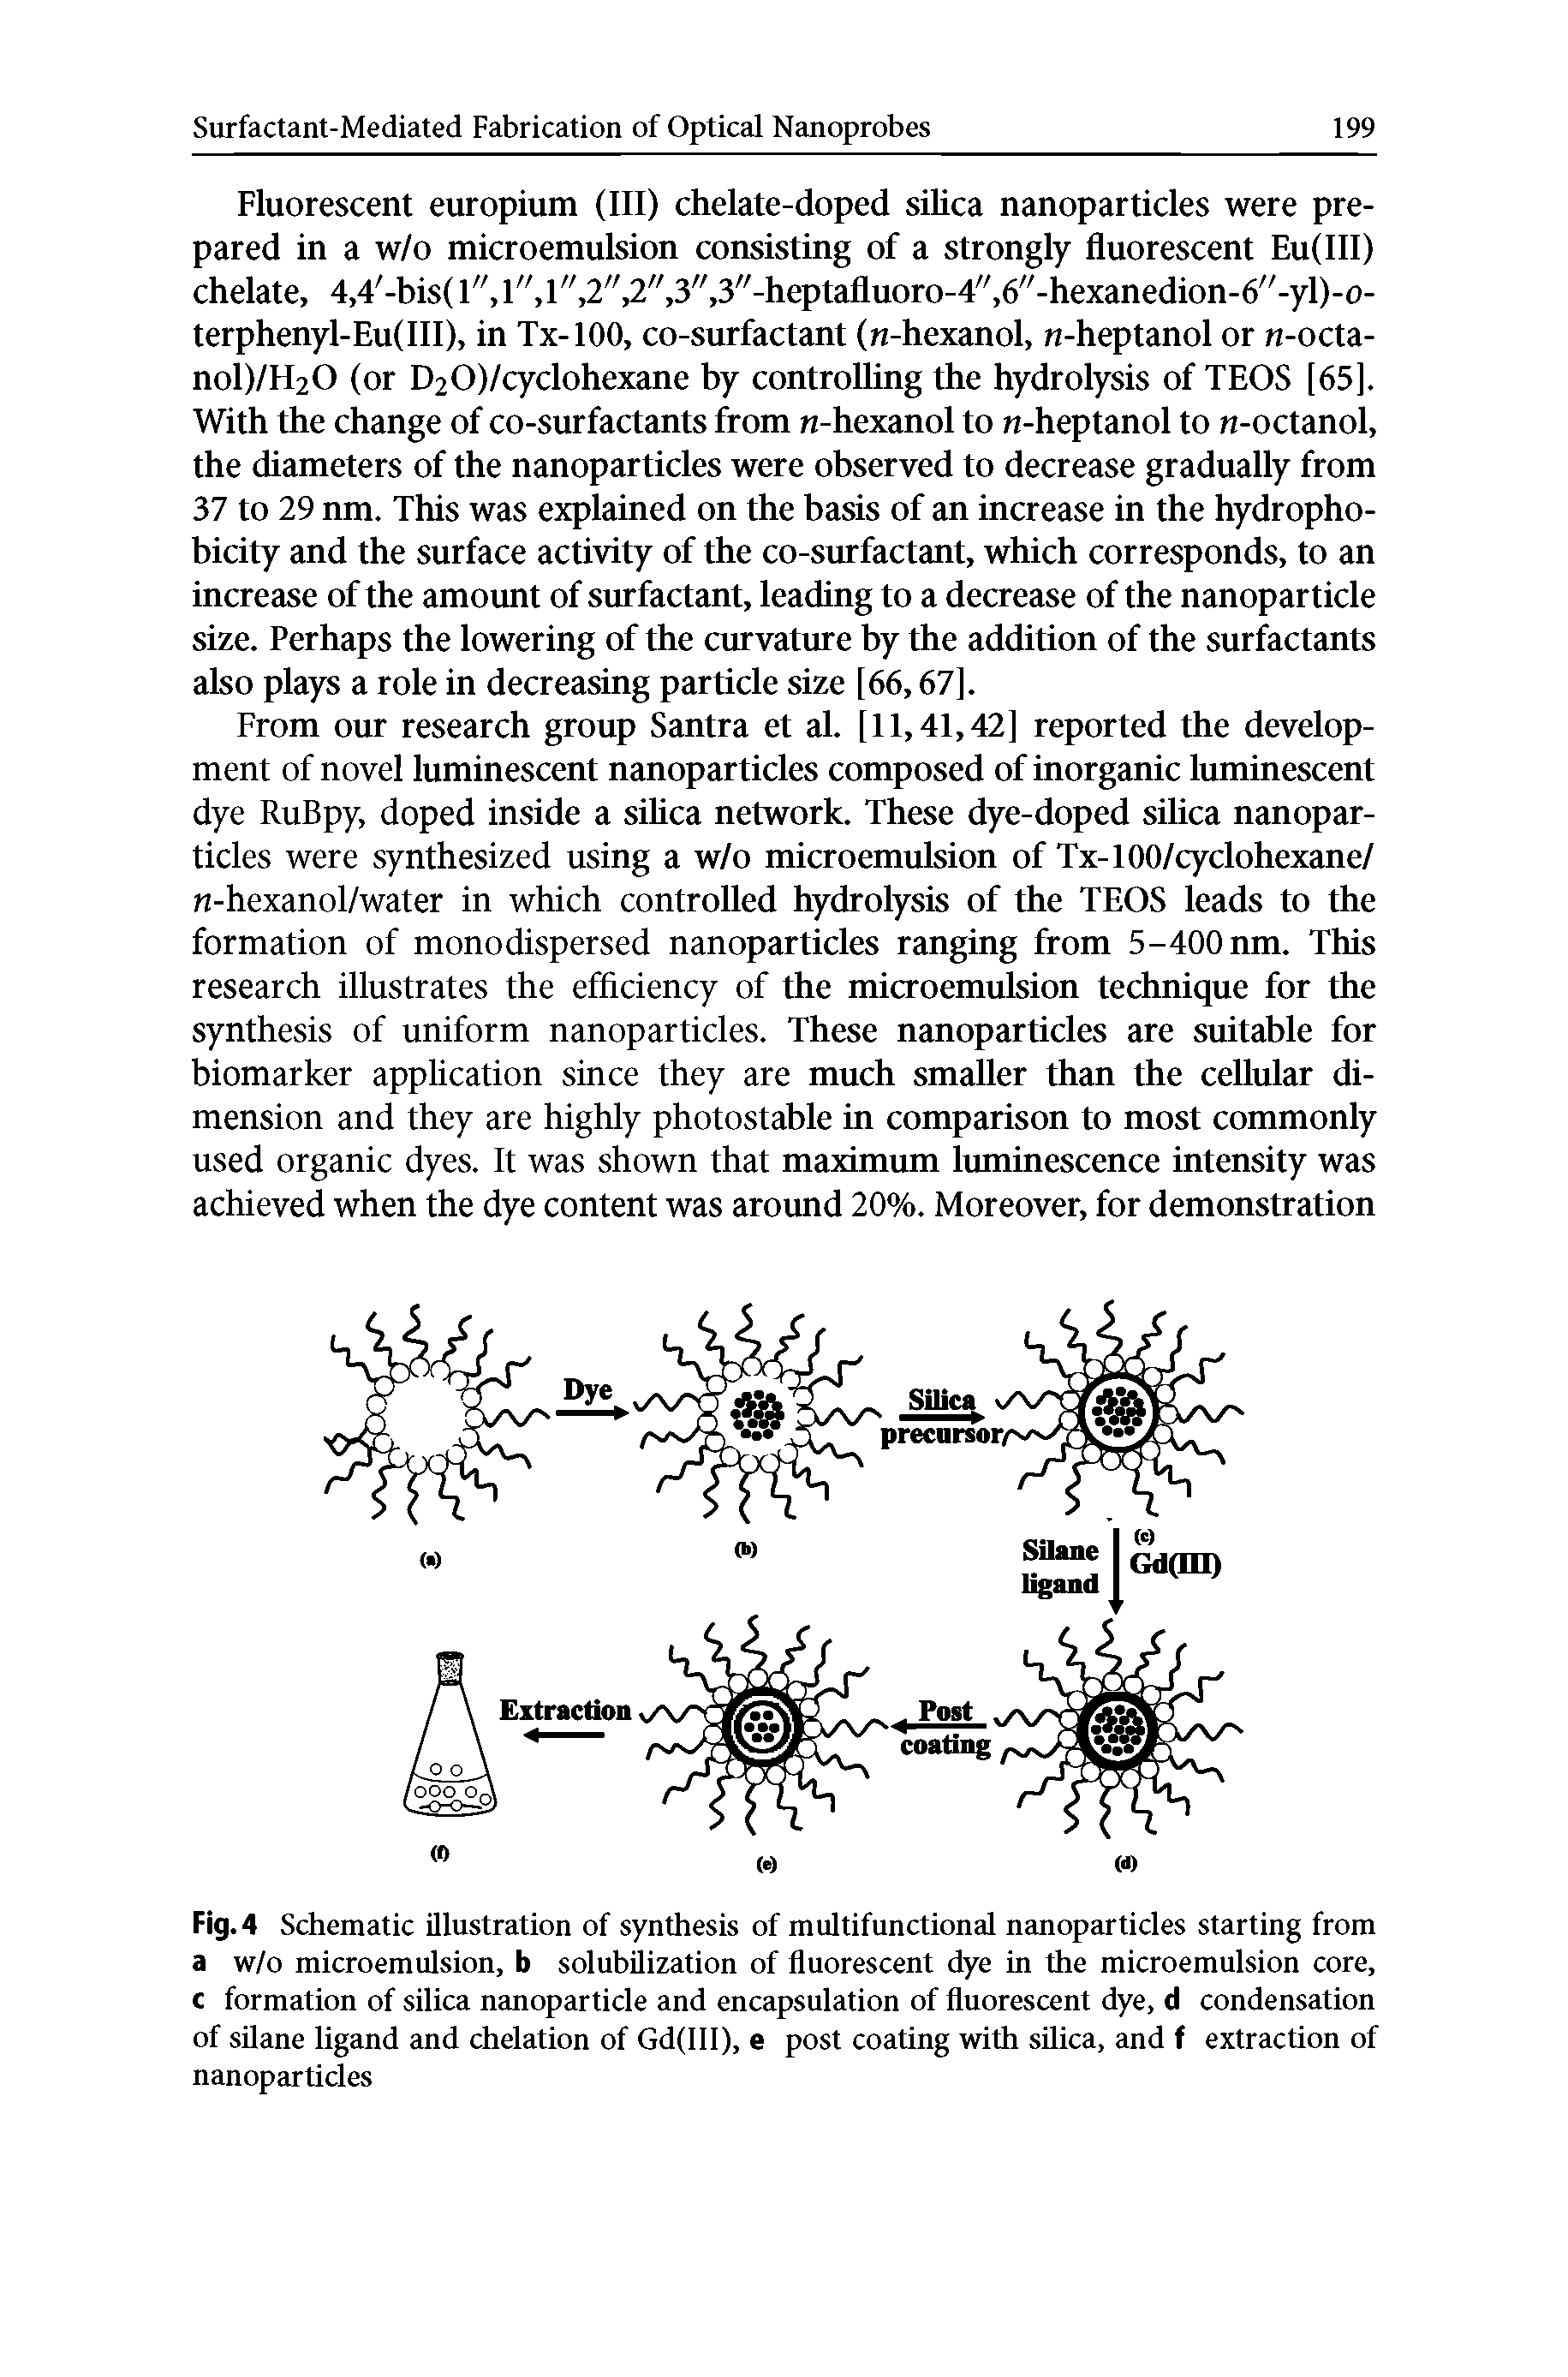 Fig. 4 Schematic illustration of synthesis of multifunctional nanoparticles starting from a w/o microemulsion, b solubilization of fluorescent dye in the microemulsion core, c formation of silica nanoparticle and encapsulation of fluorescent dye, d condensation of silane ligand and chelation of Gd(lll), e post coating with silica, and f extraction of nanoparticles...